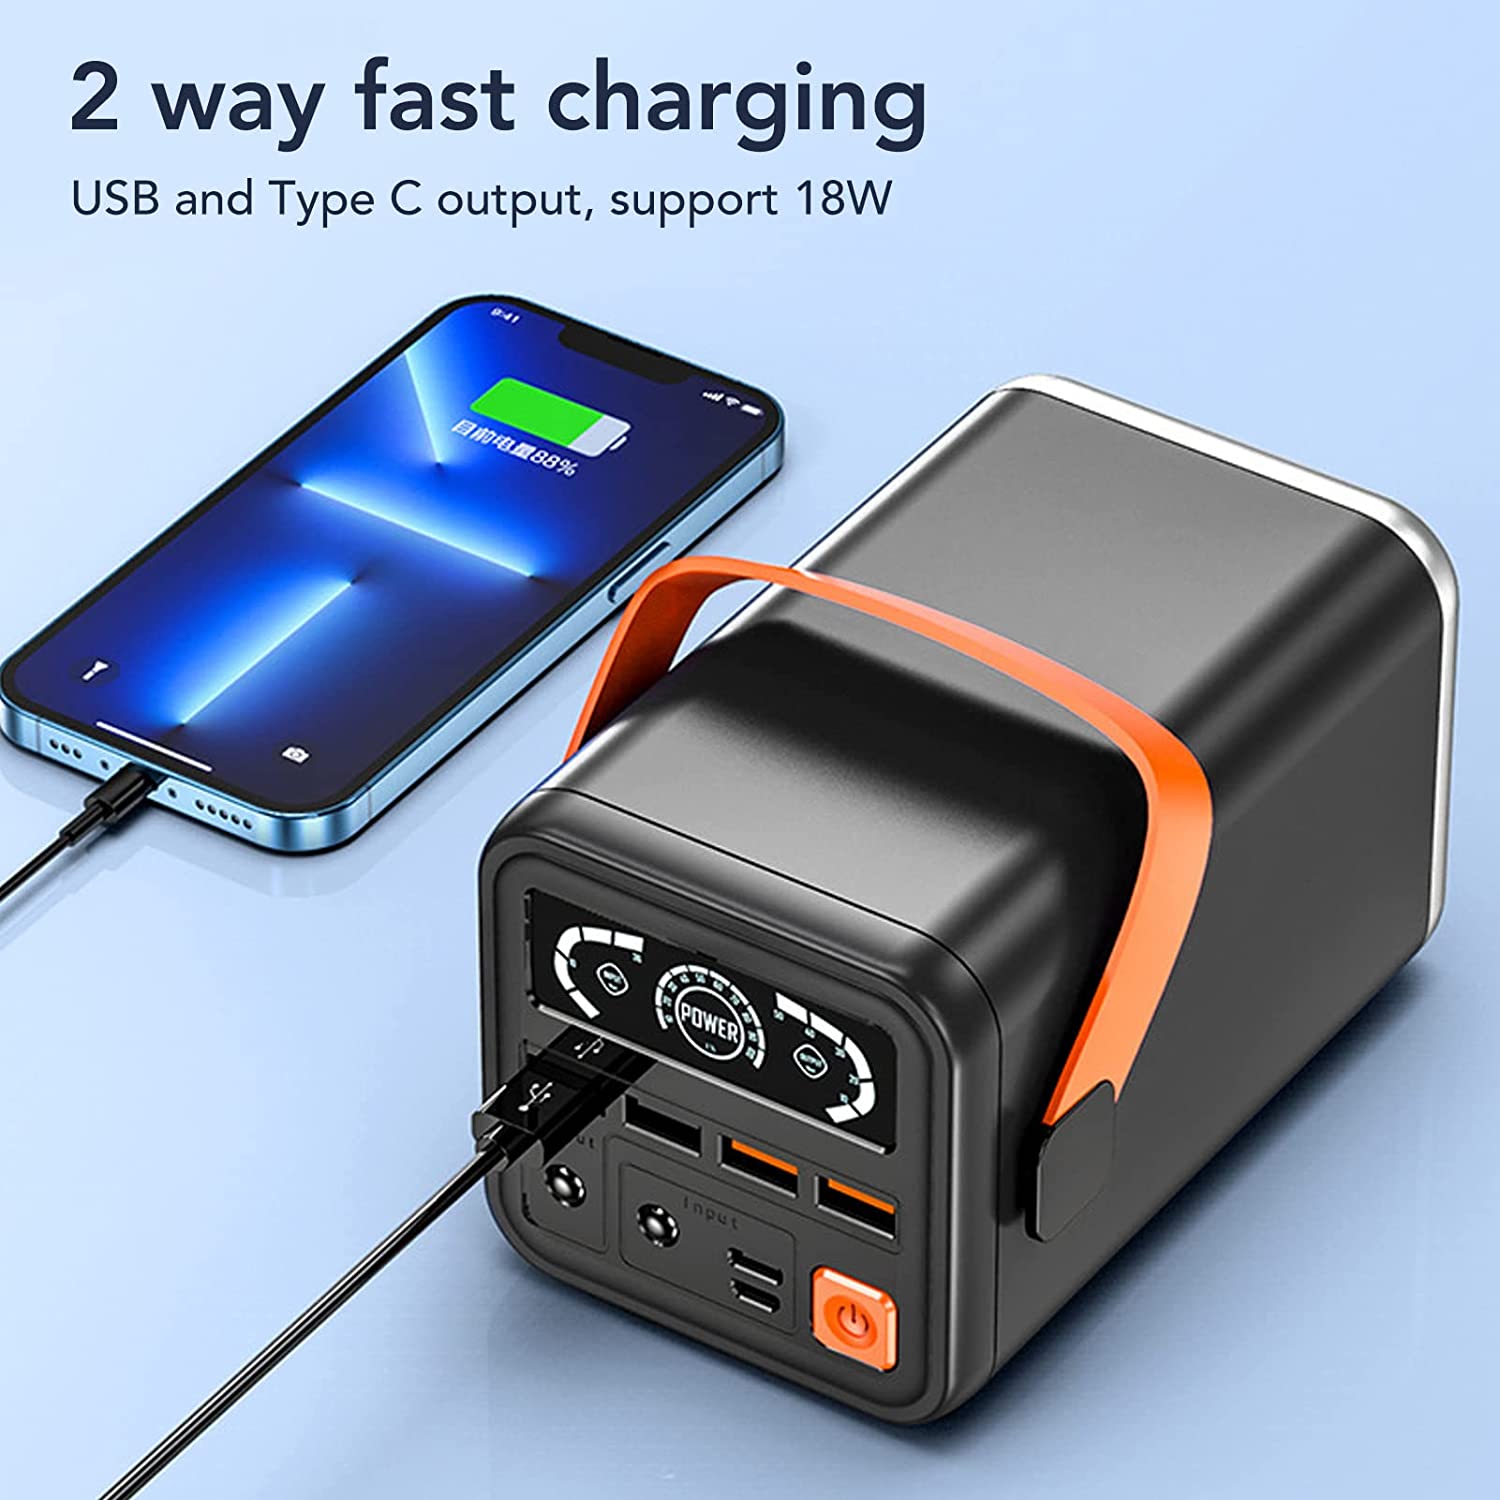 Outdoor Emergency Portable Mobile Power Supply Mobile Phone Charger 60000mah Power Bank Large Capacity Power Bank